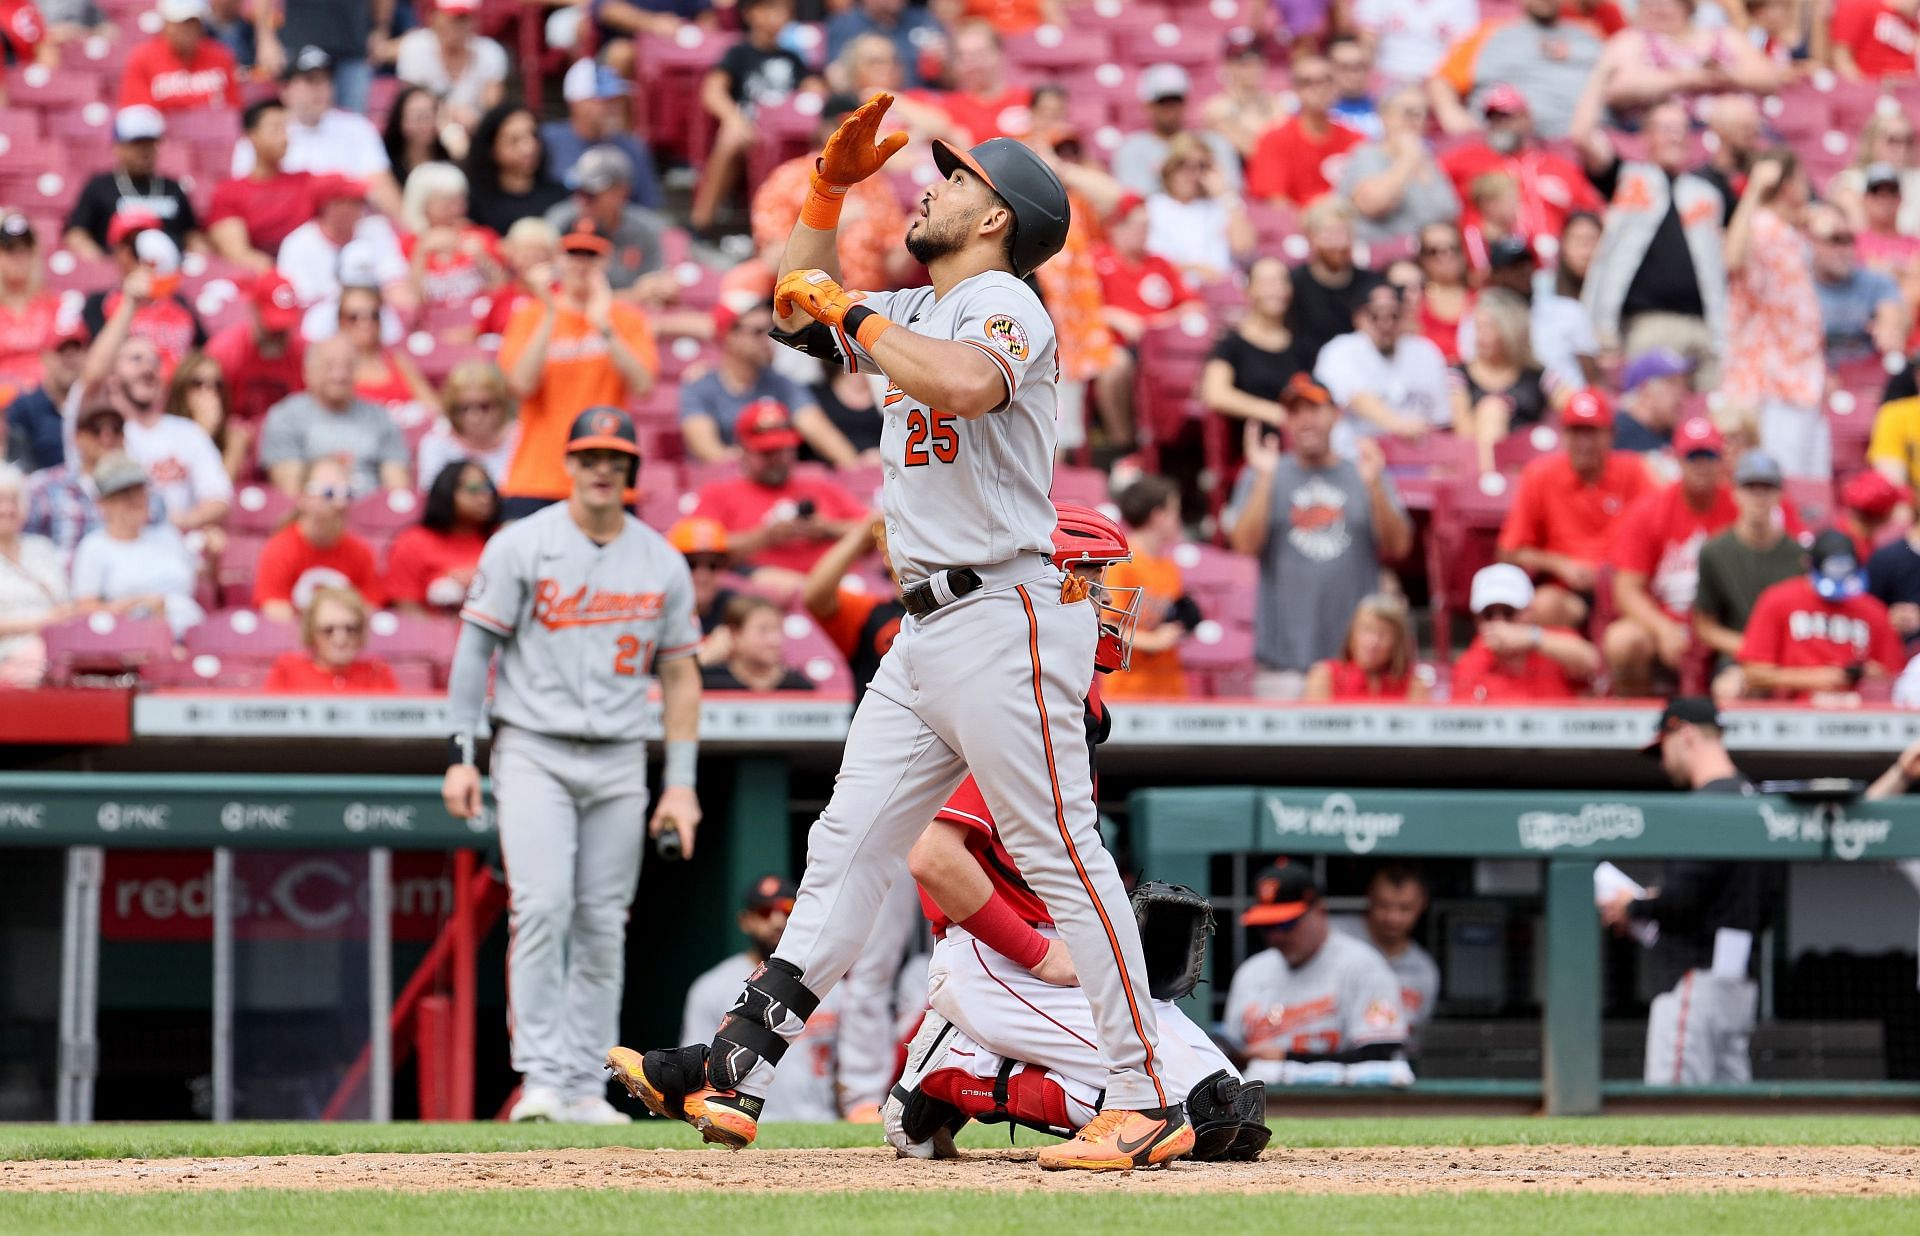 The Baltimore Orioles made successful moves this week.